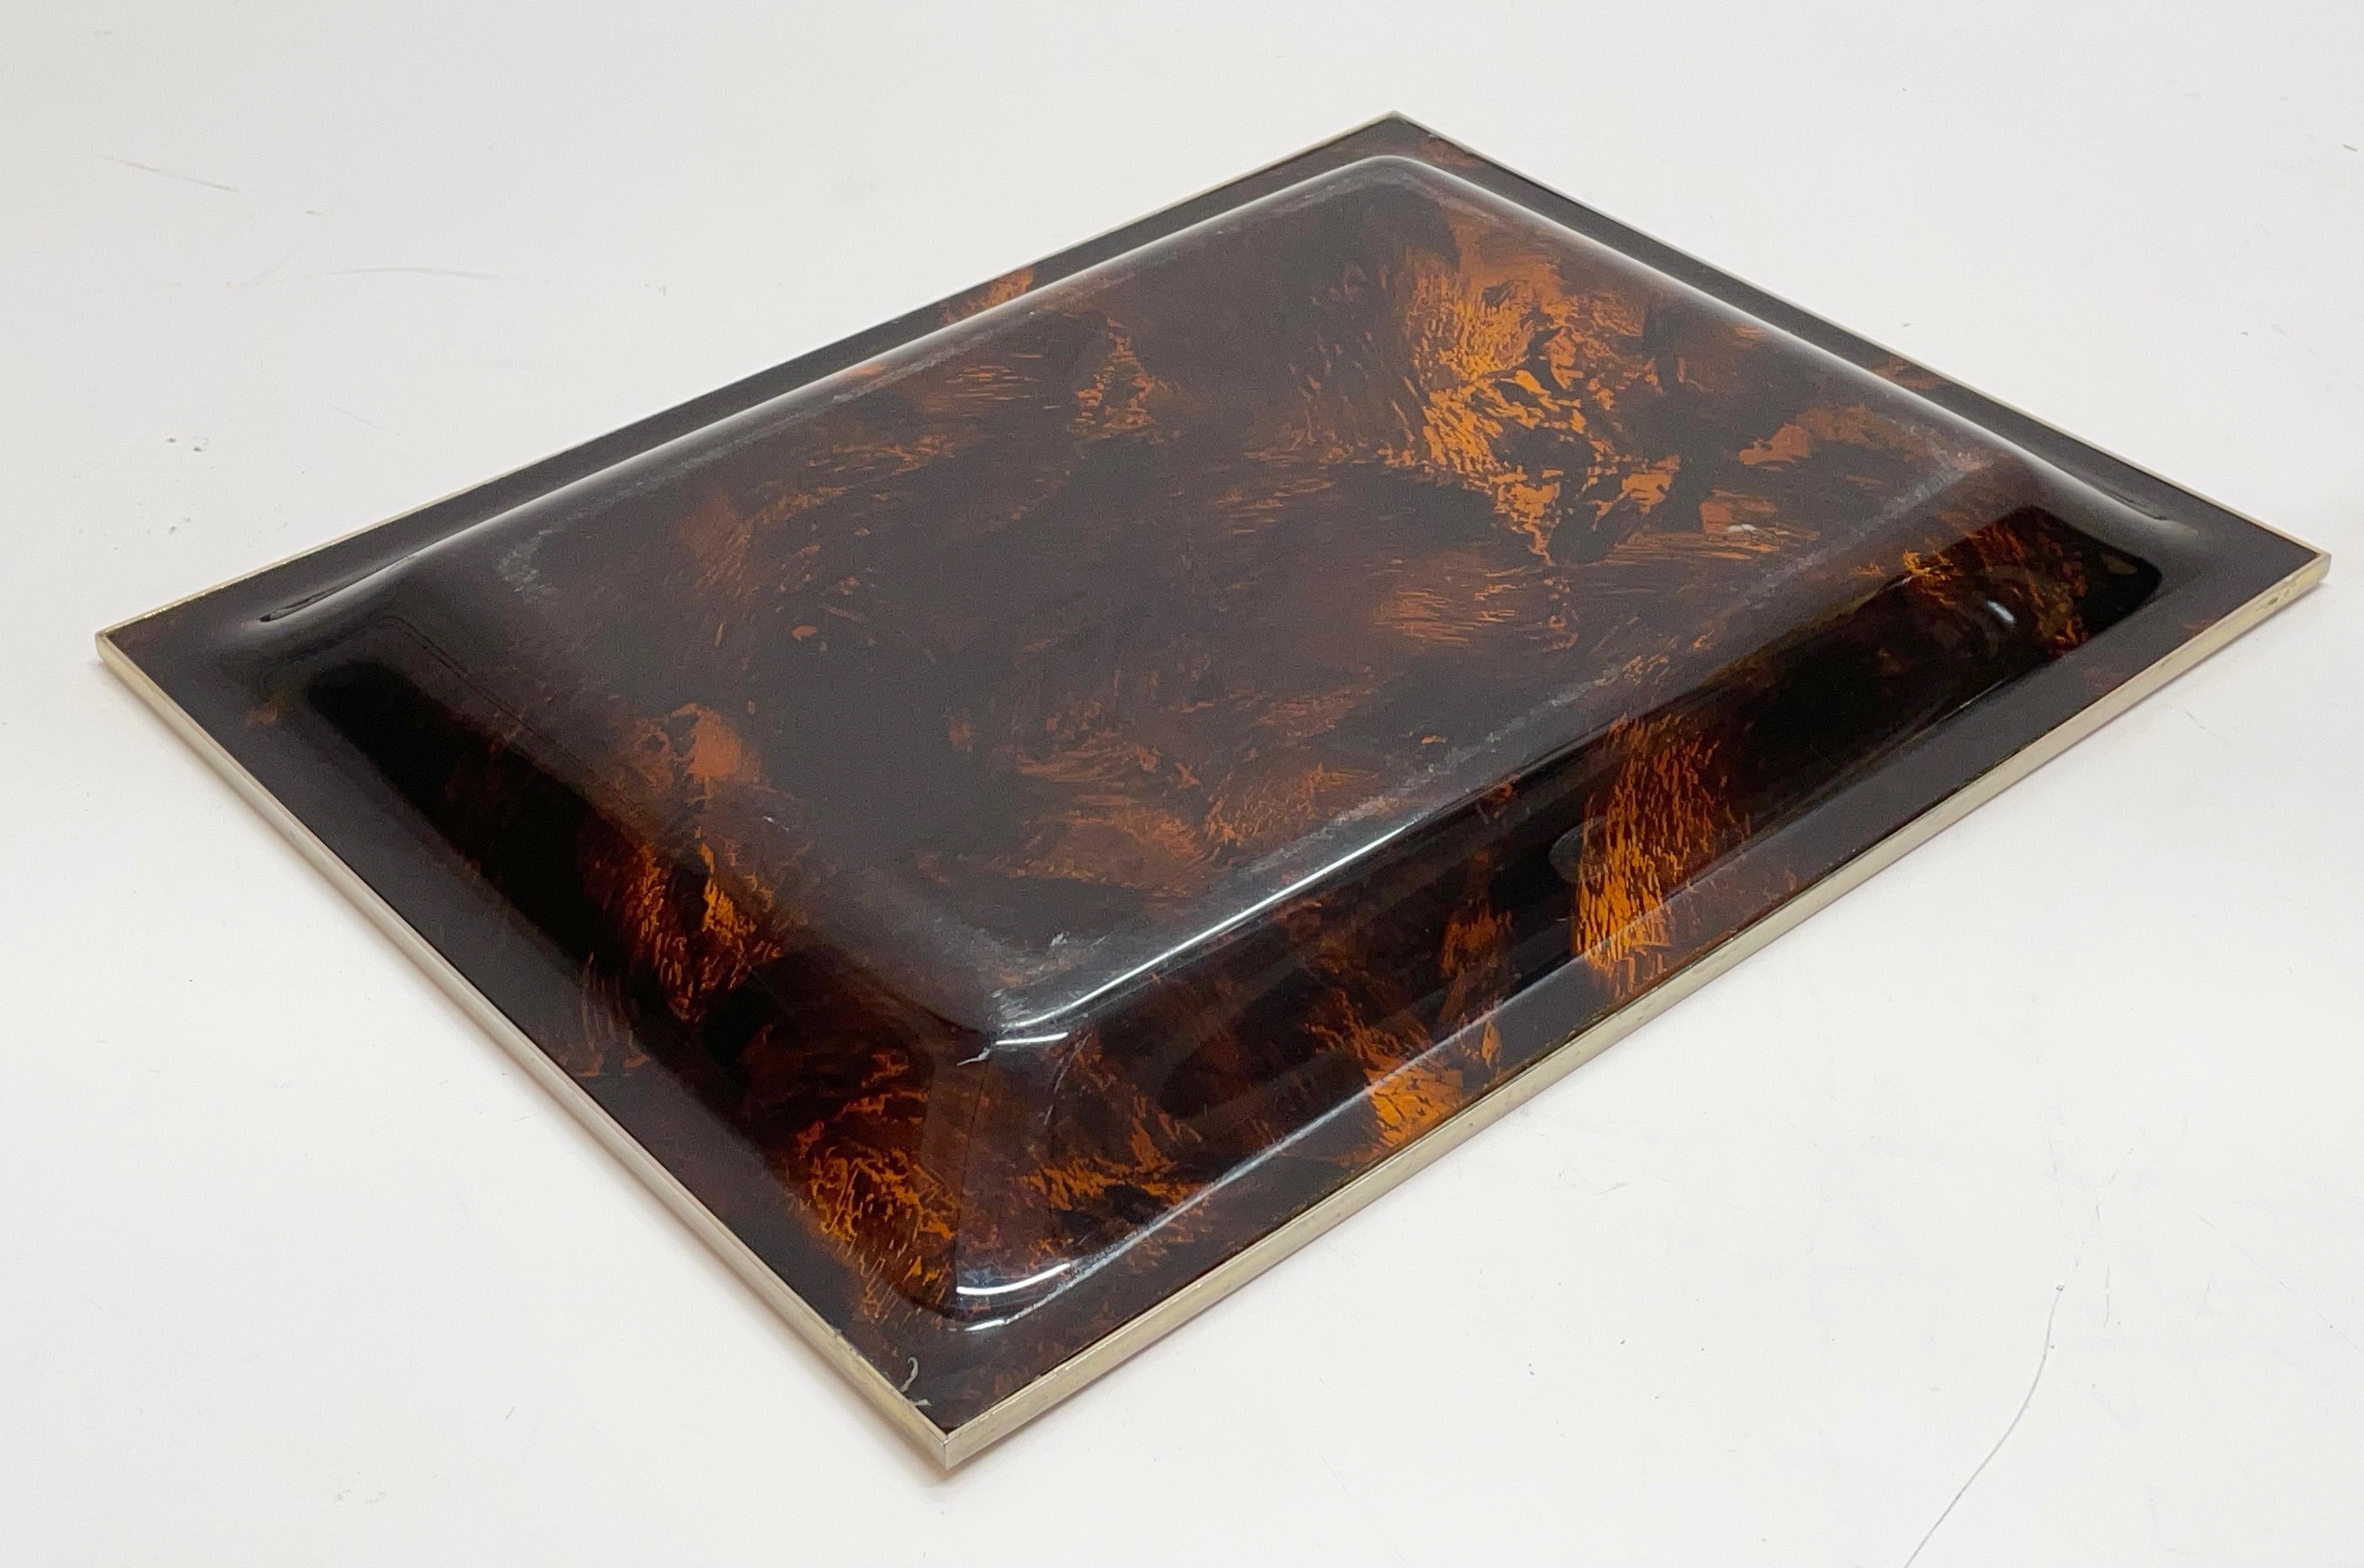 Midcentury Tortoiseshell Plexiglass Italian Serving Tray after Willy Rizzo 1970s For Sale 6